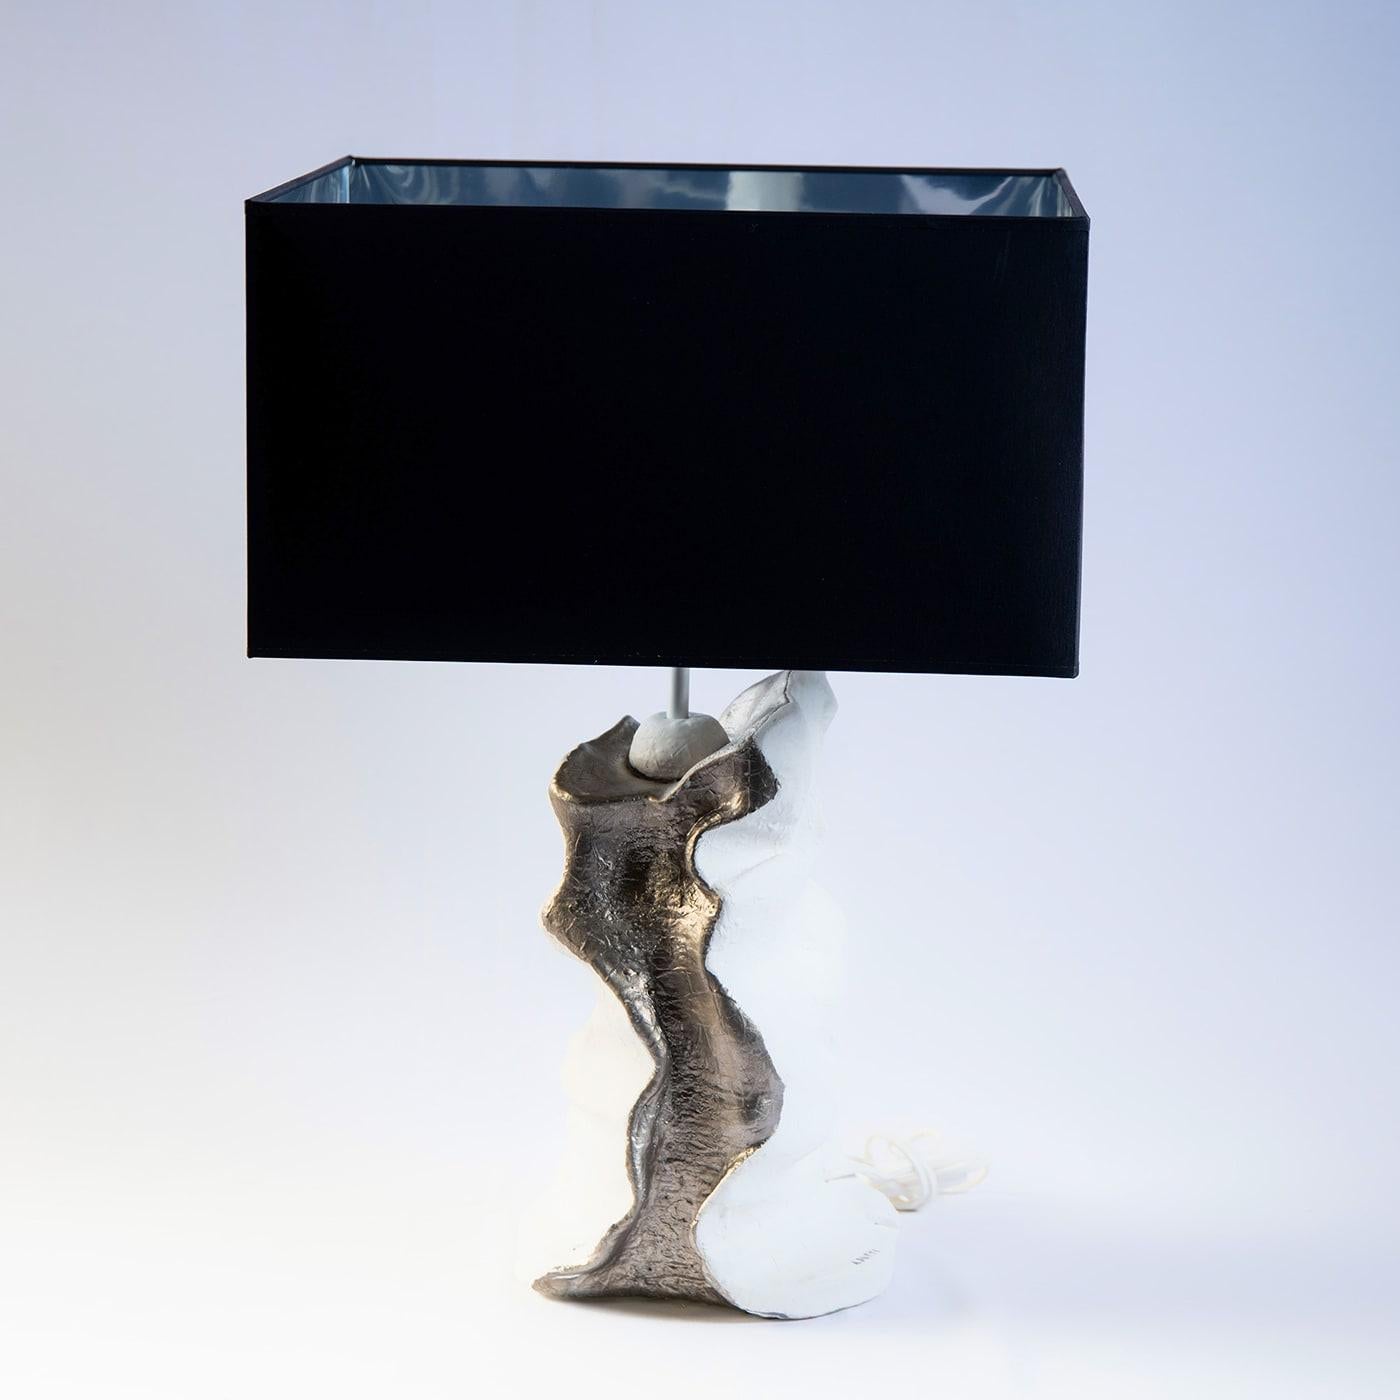 The existential question of how humanity could defy eternity inspired artist Angelo Salemi to craft this singular table lamp. A luxurious and elegant lampshade bleak con the outside and silvery on the inside stands above a sinuous ceramic base with